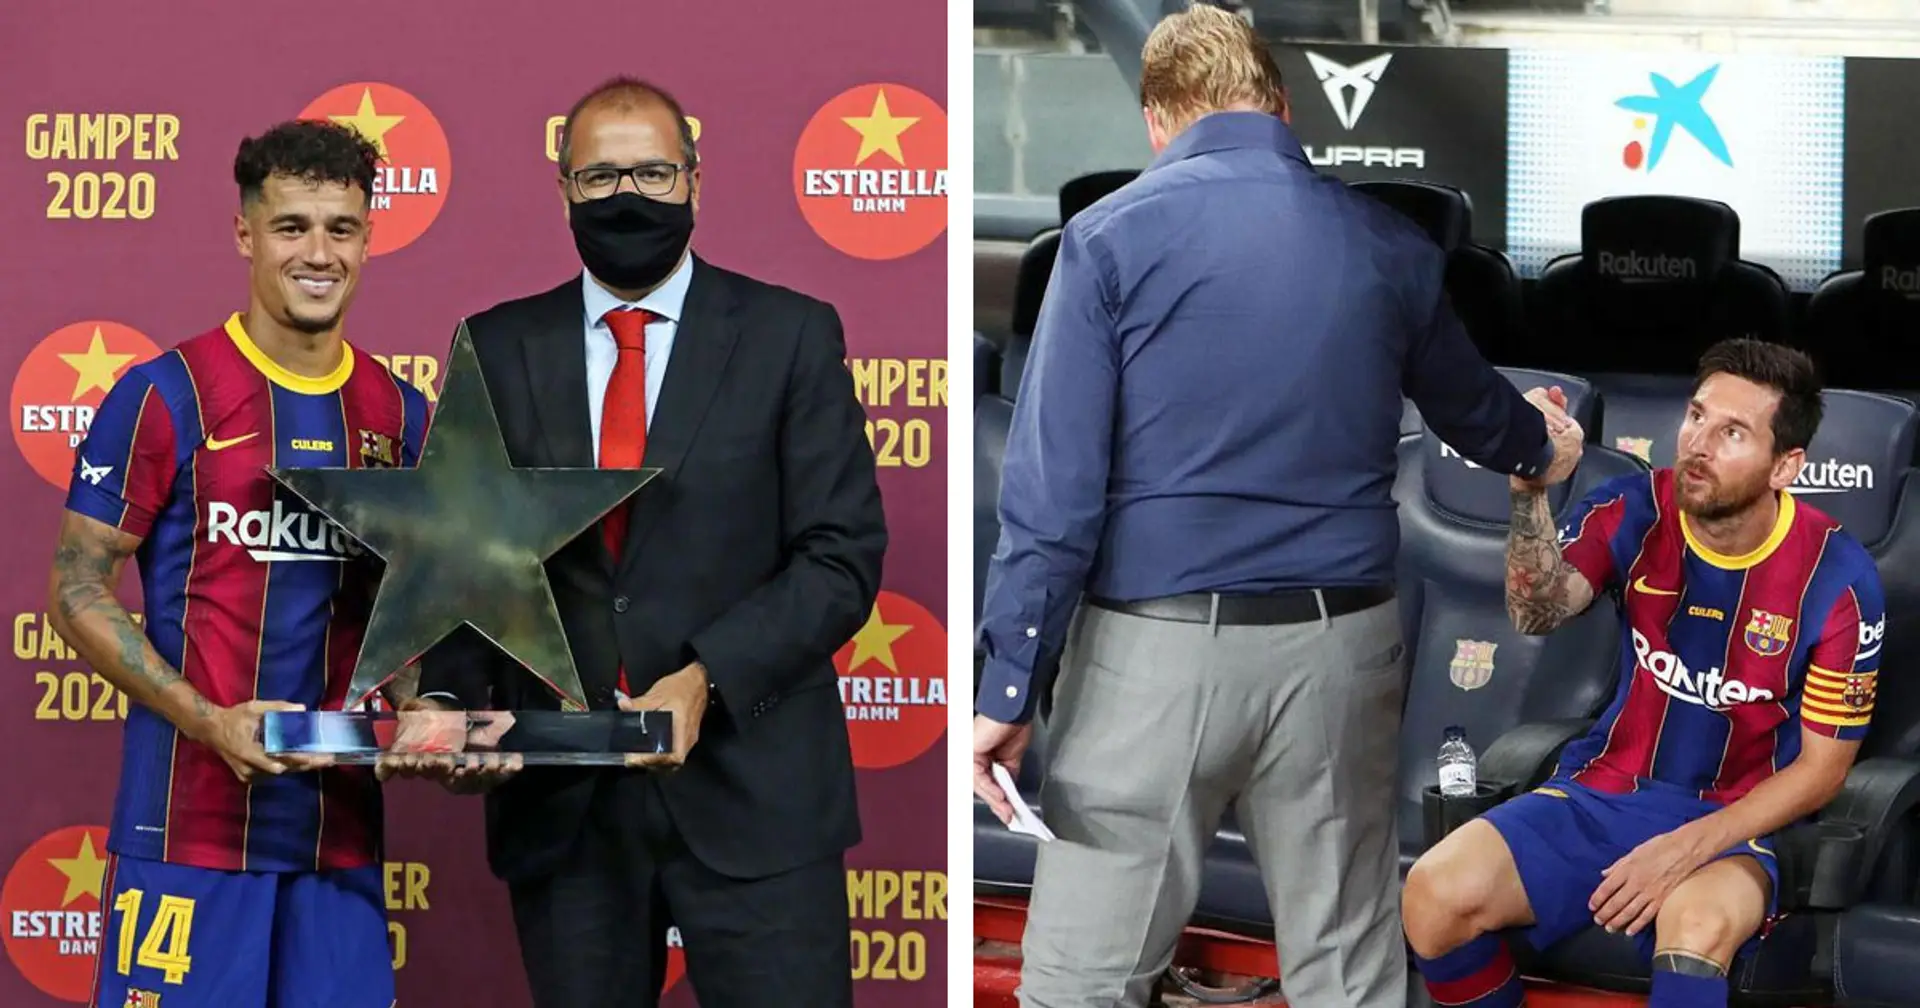 Coutinho with MOTM prize, Messi and Koeman shake hands  more best pics that defined Barca's week